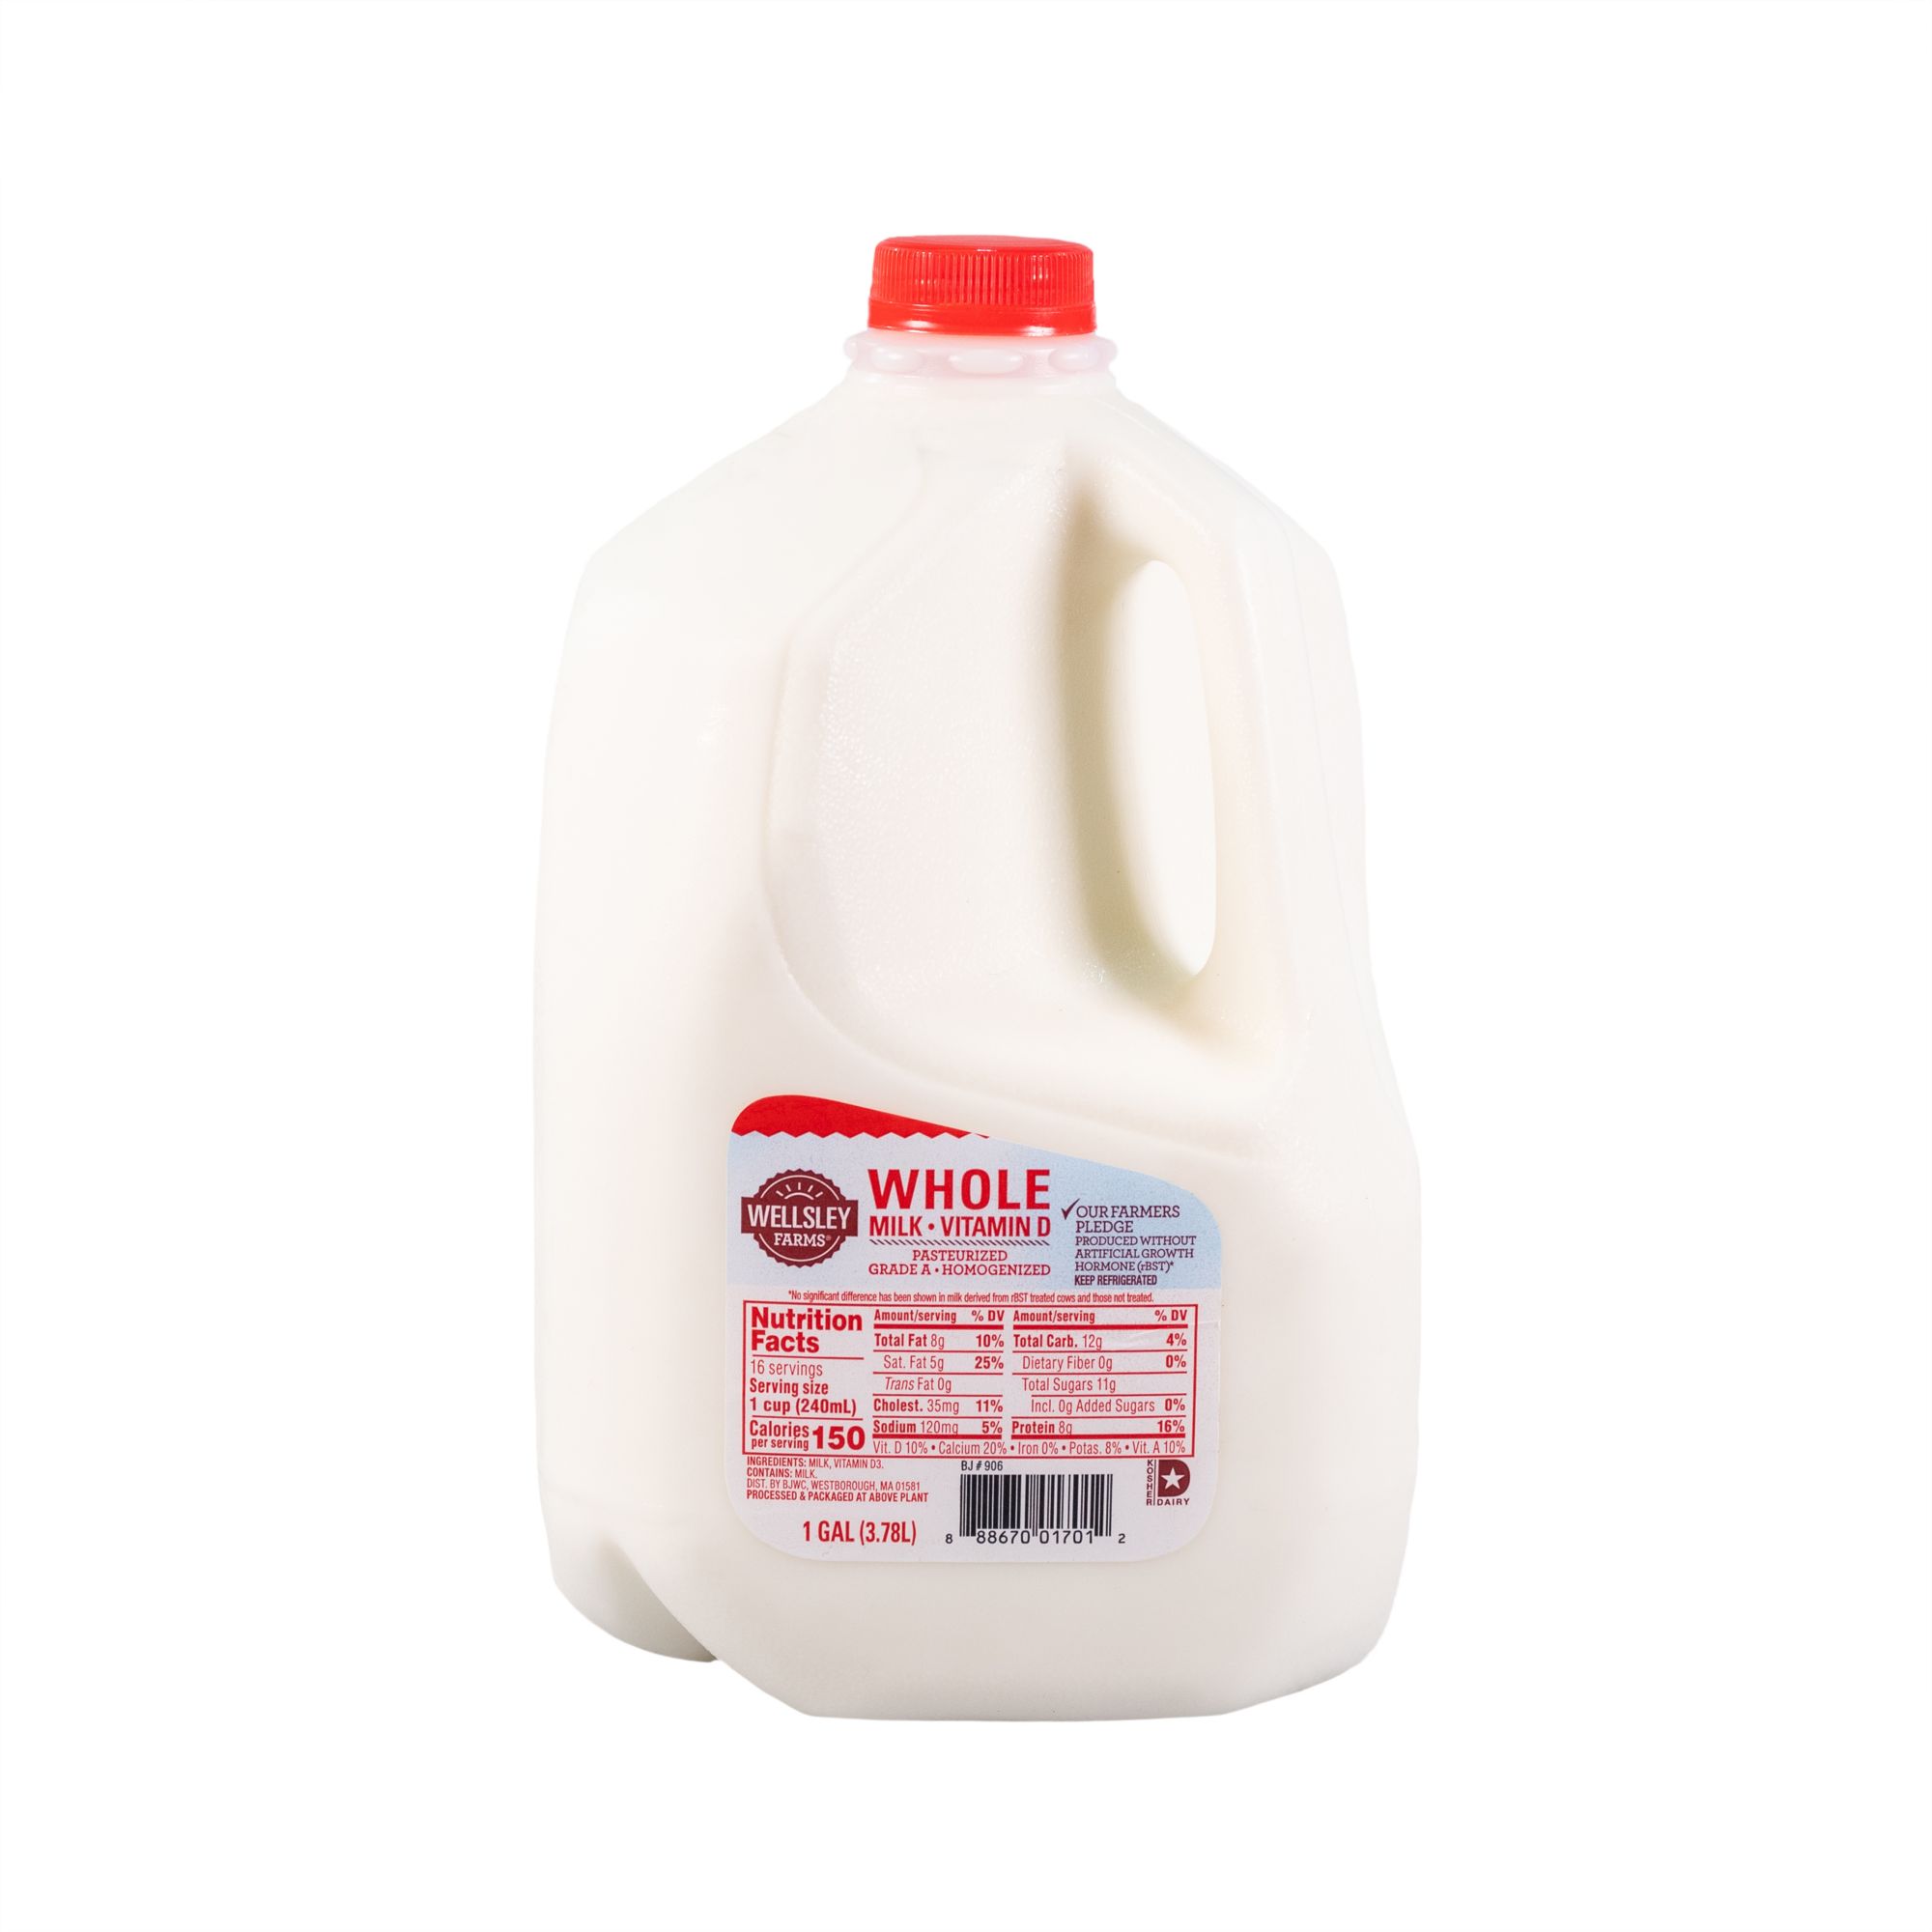 Nestle Nan Optipro 1 Baby Dry Milk Mix 800g ❤️ home delivery from the store